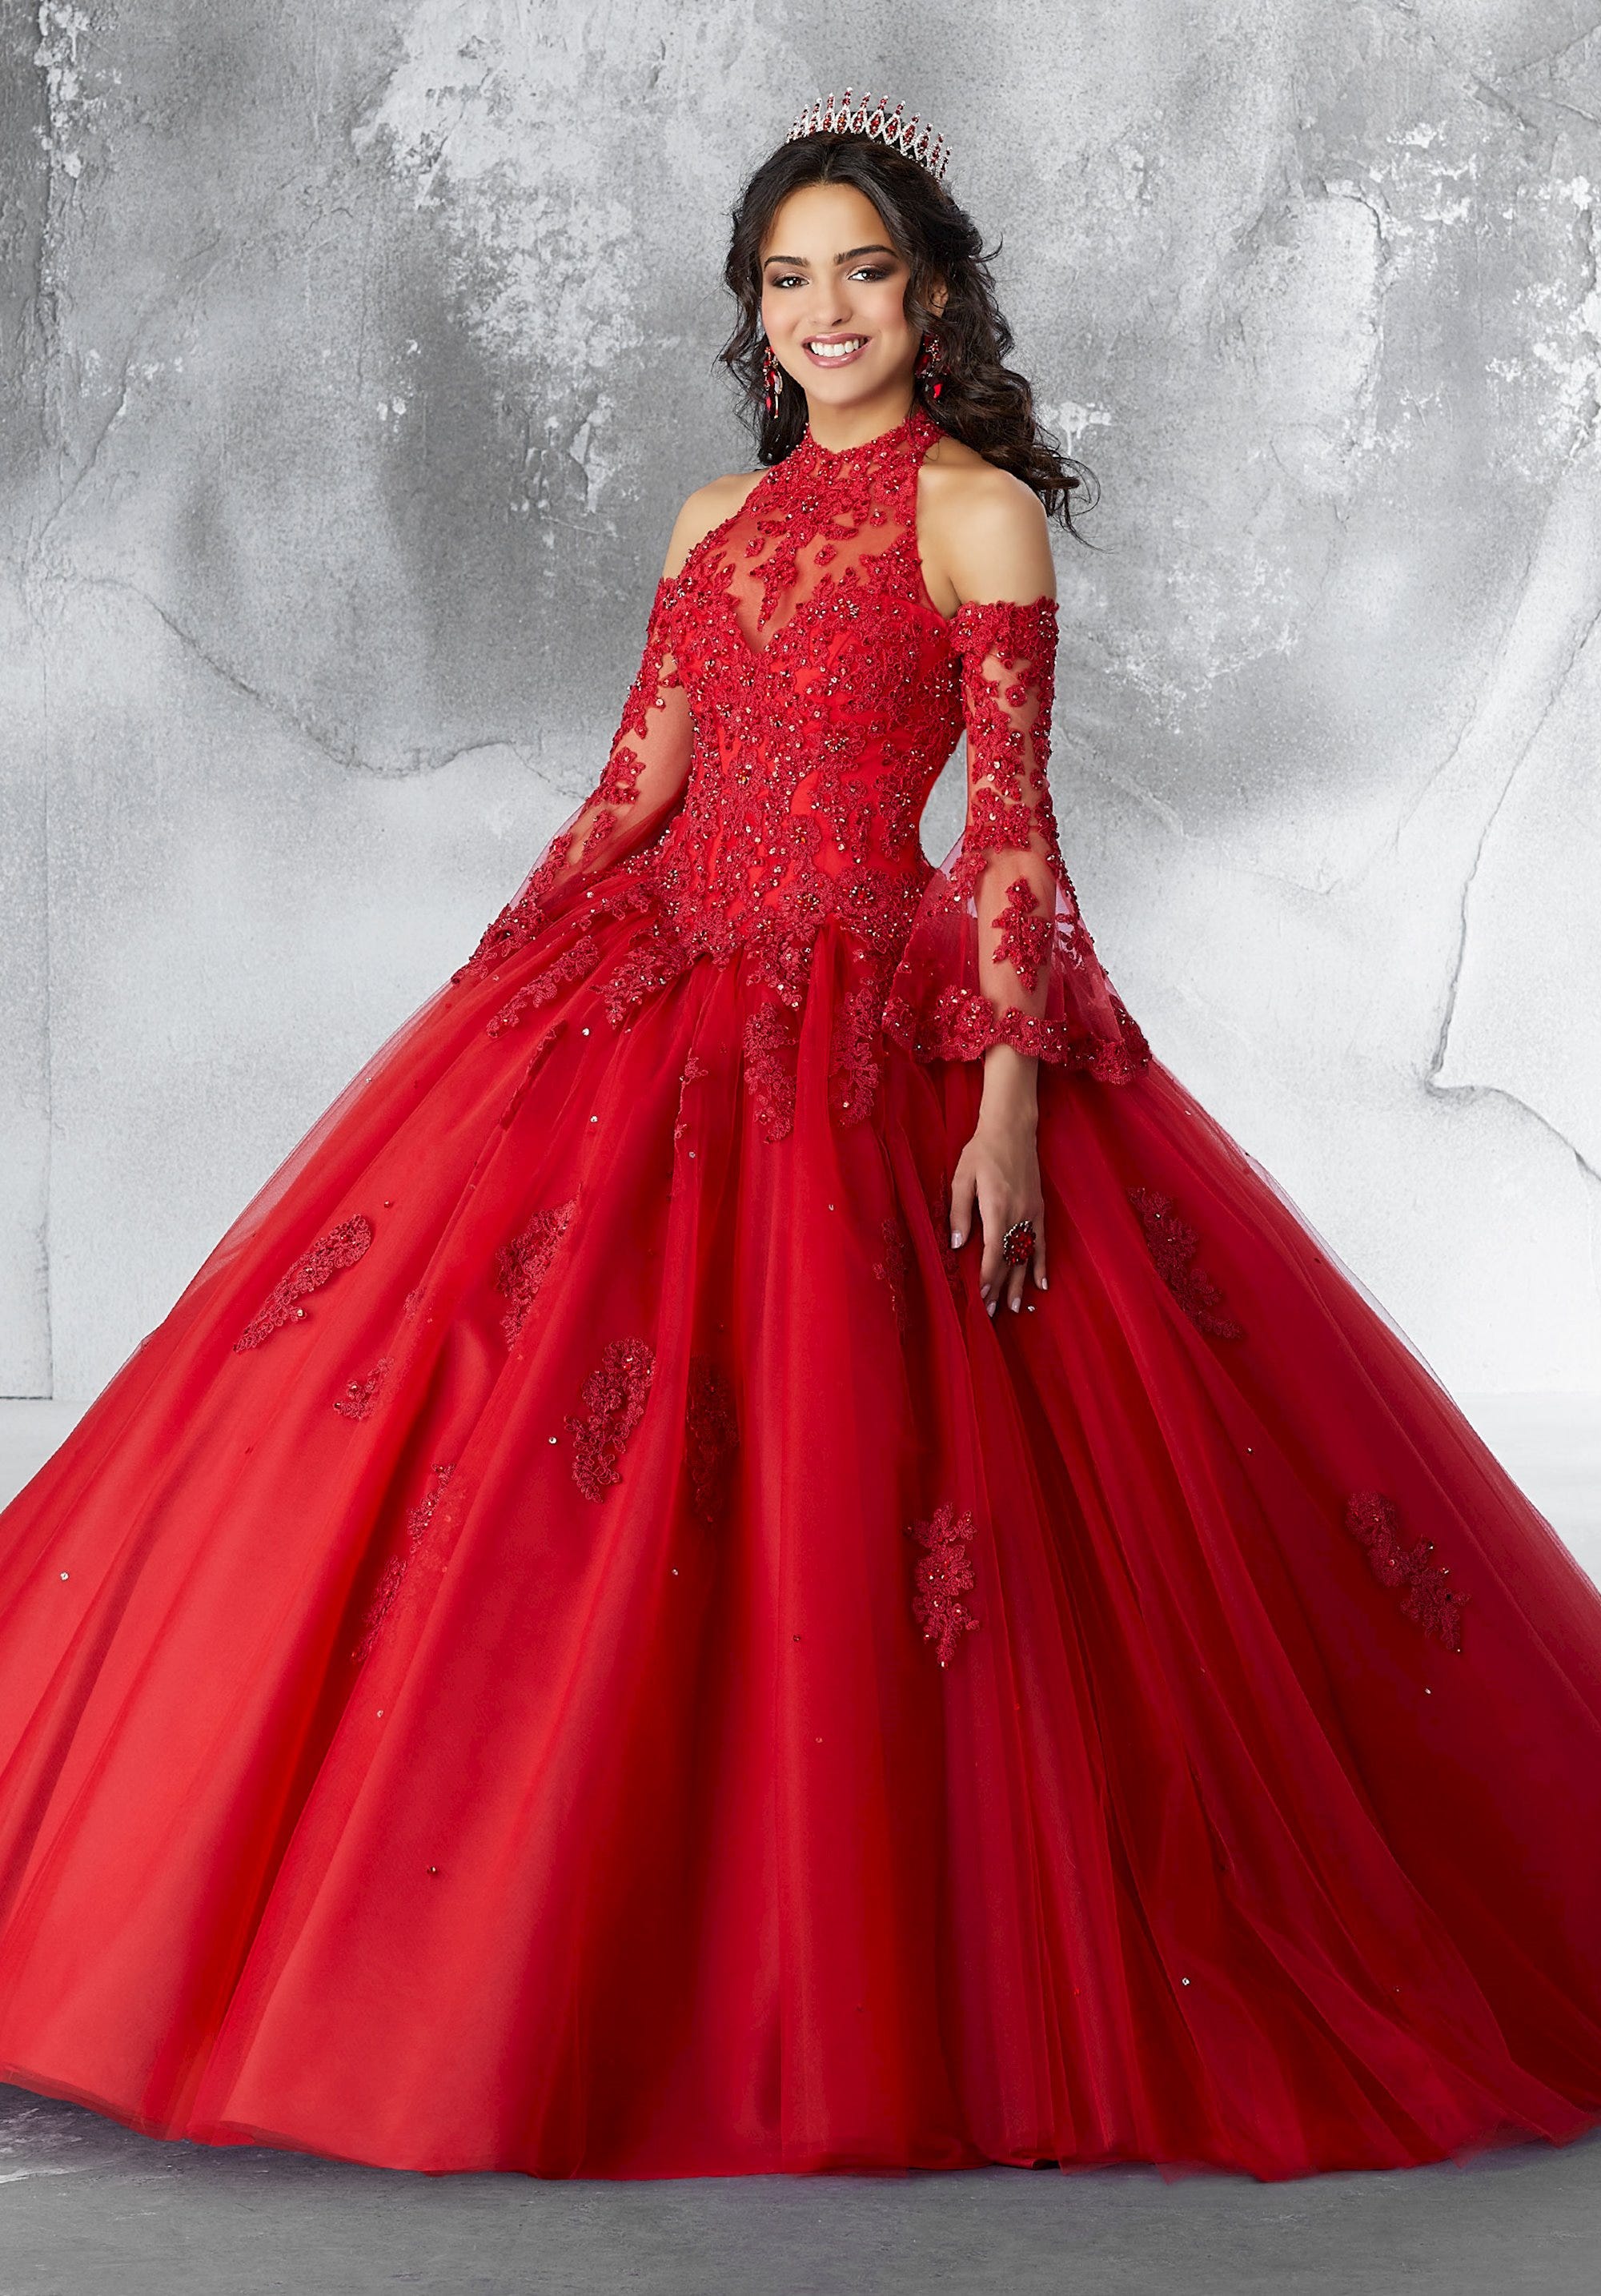 the most beautiful quinceanera dresses off 74% - medpharmres.com